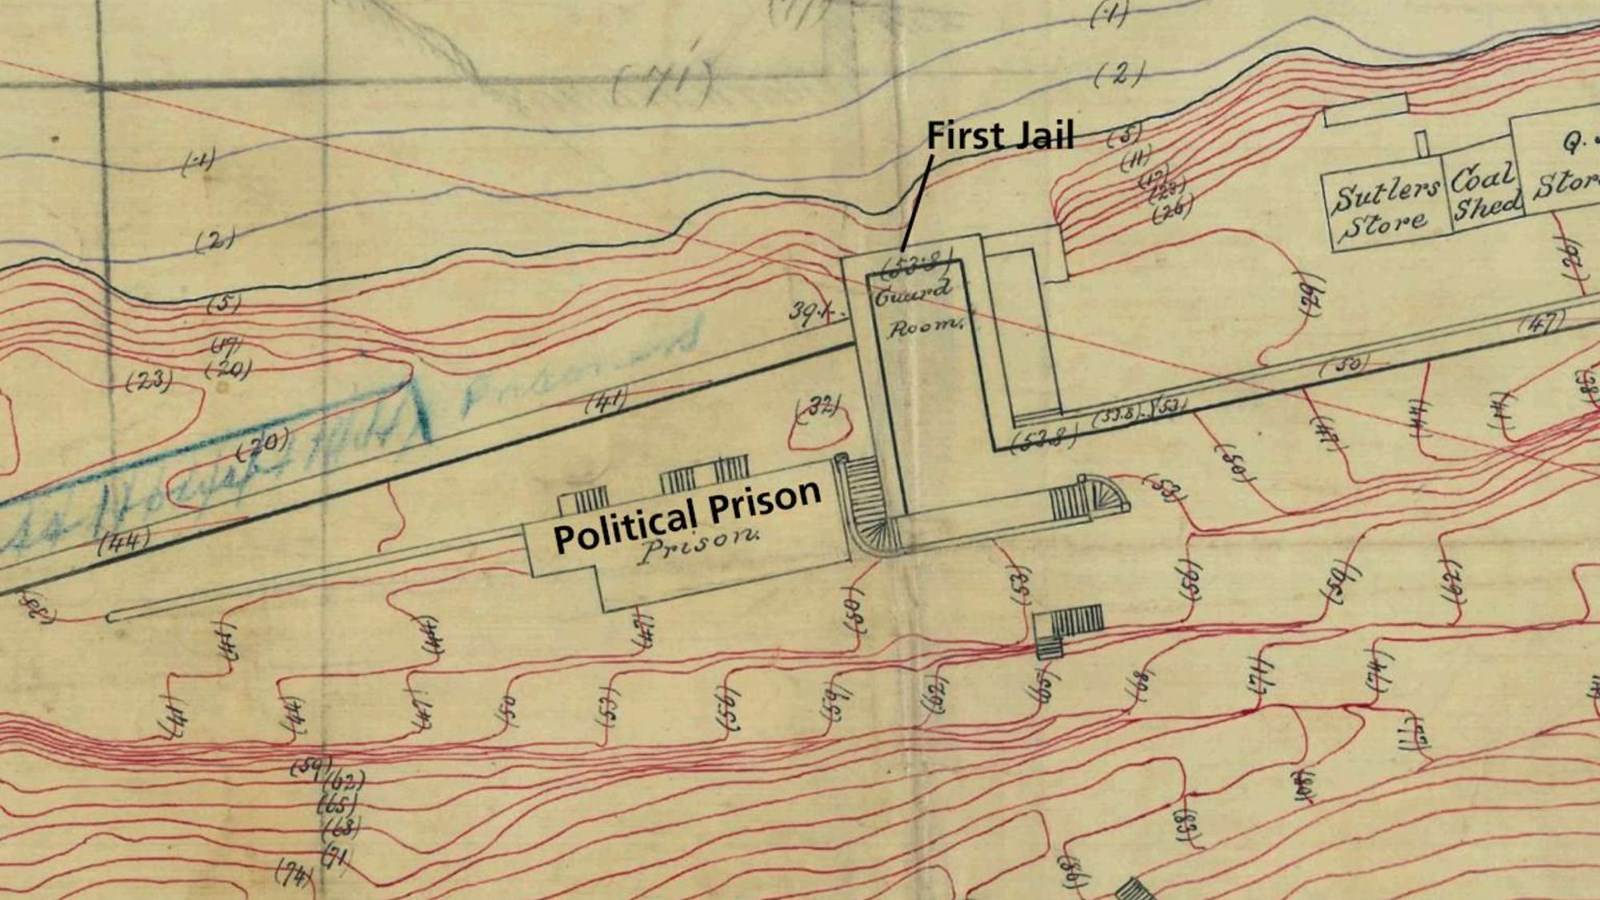 Contour Map with red lines denoting elevation of the site plan on Alcatraz Island